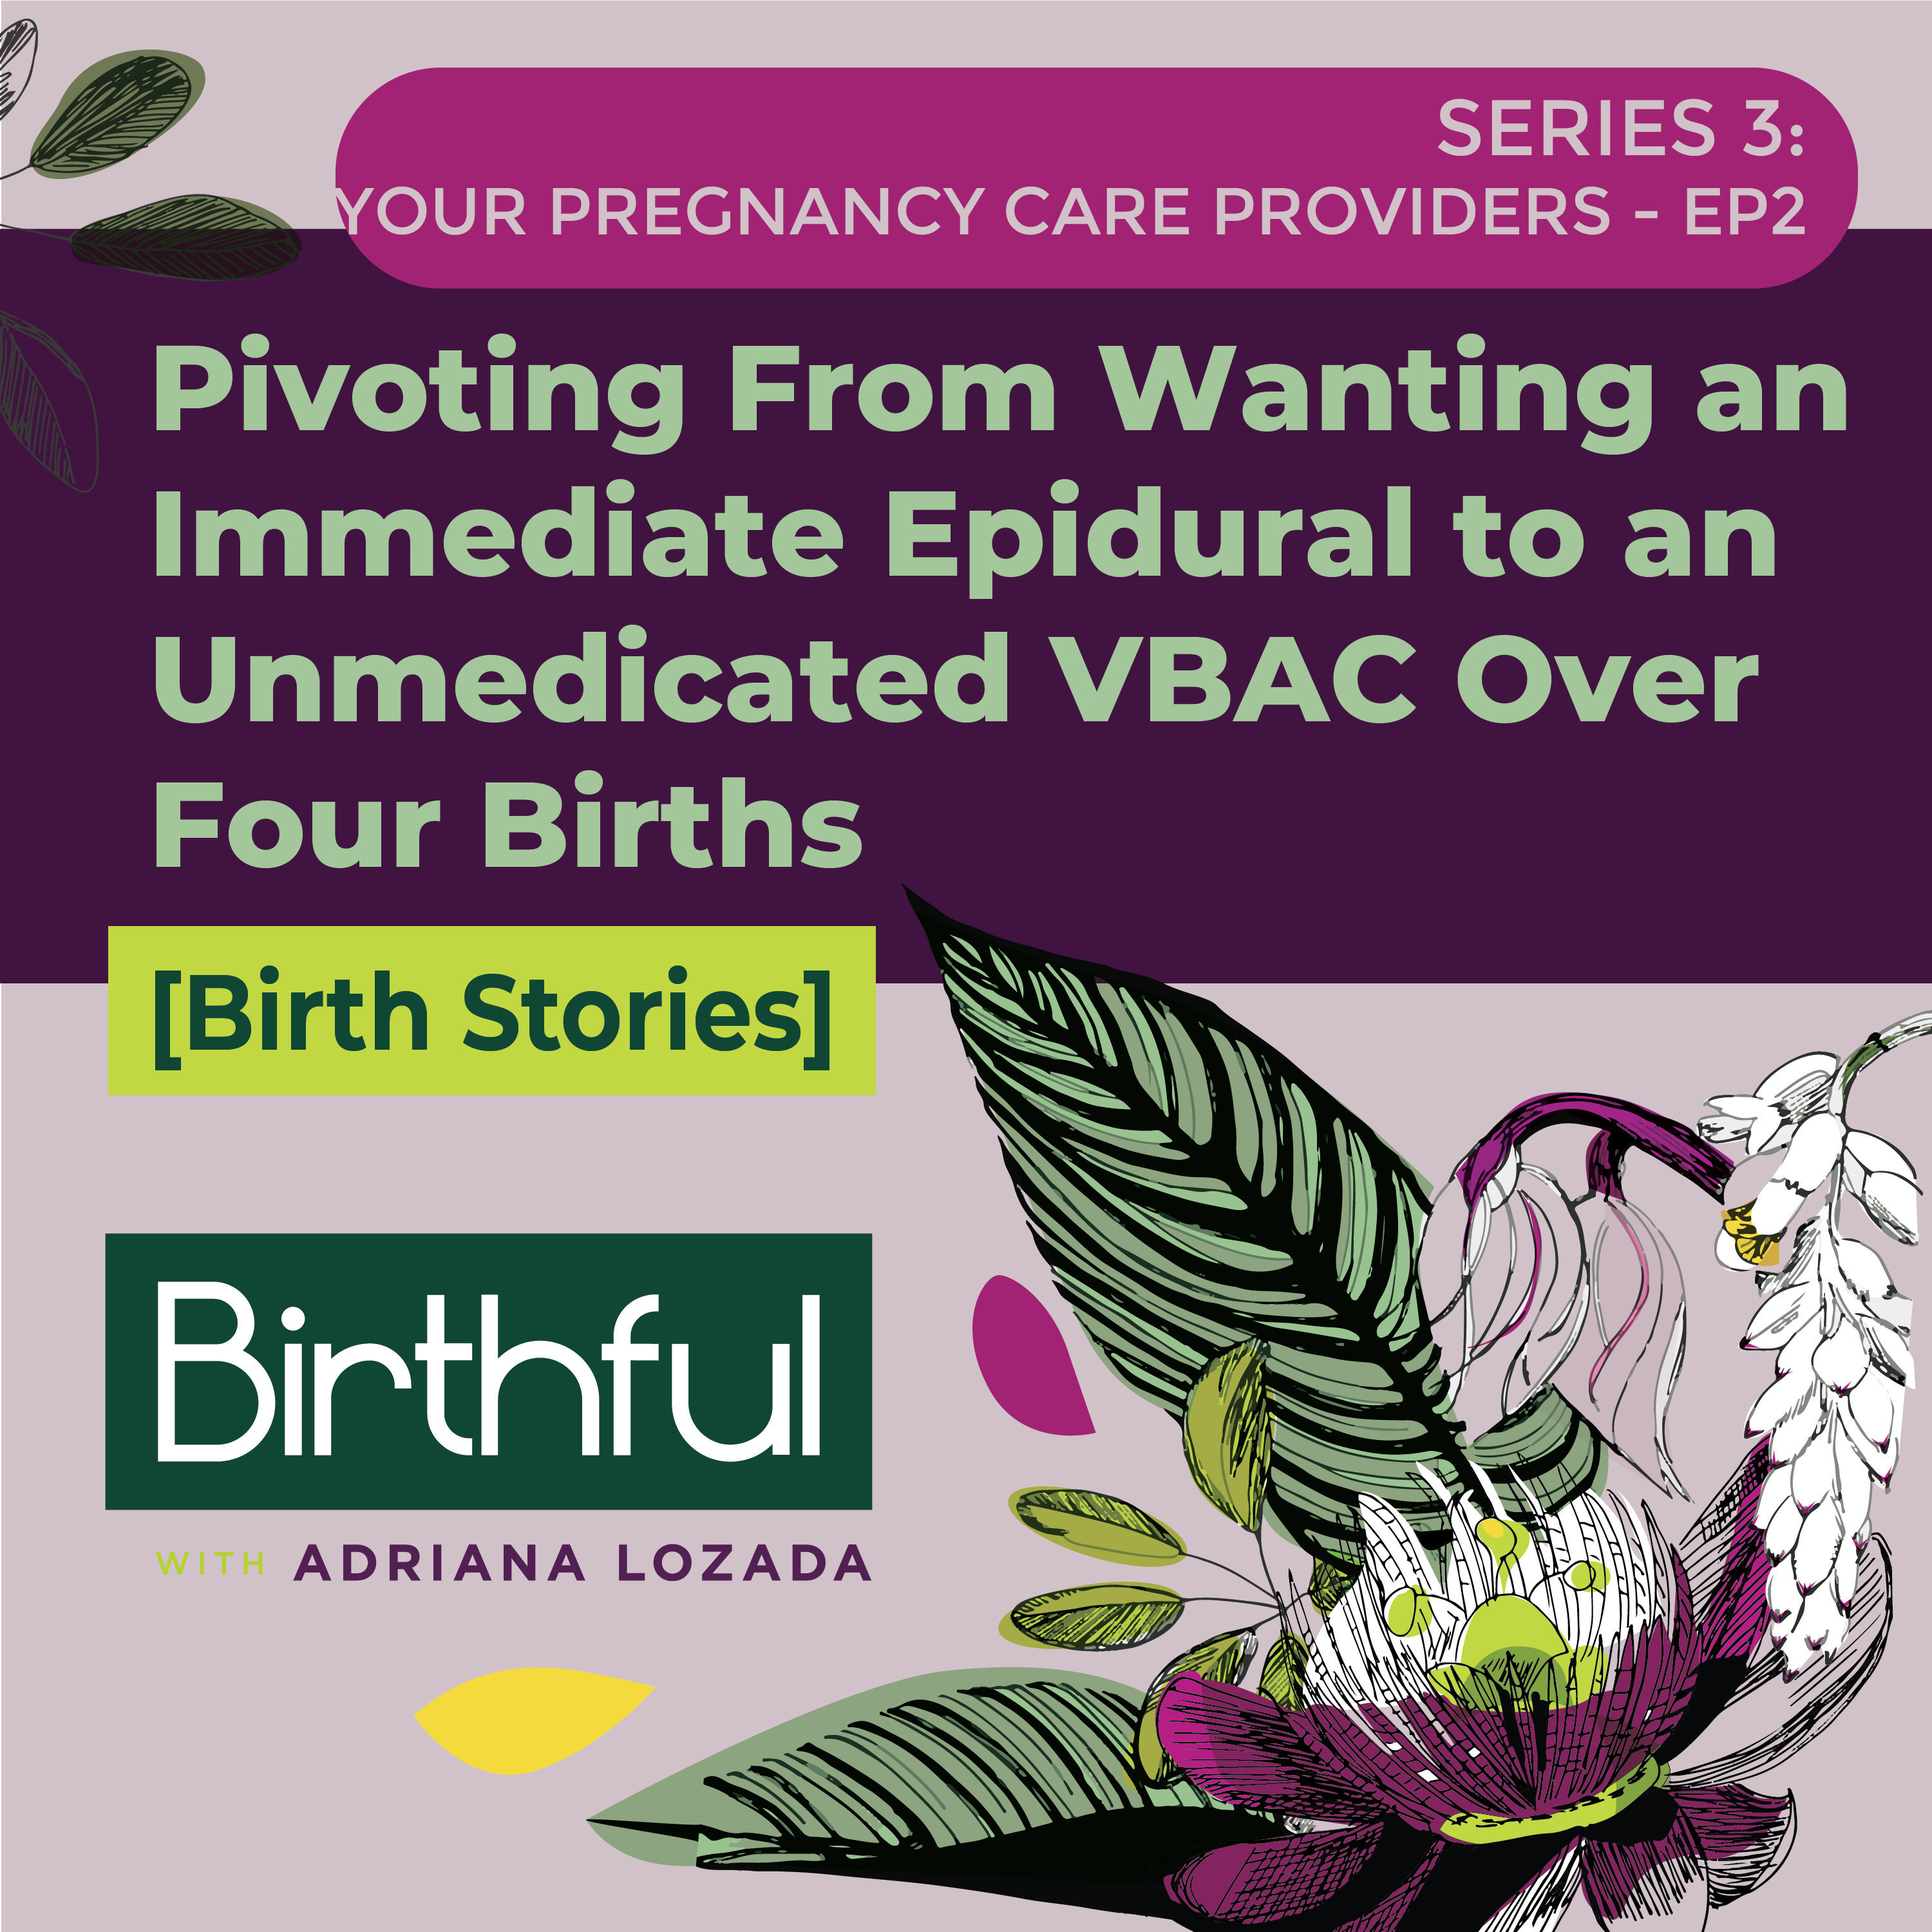 [Birth Stories] Pivoting From Wanting an Immediate Epidural to an Unmedicated VBAC Over Four Births